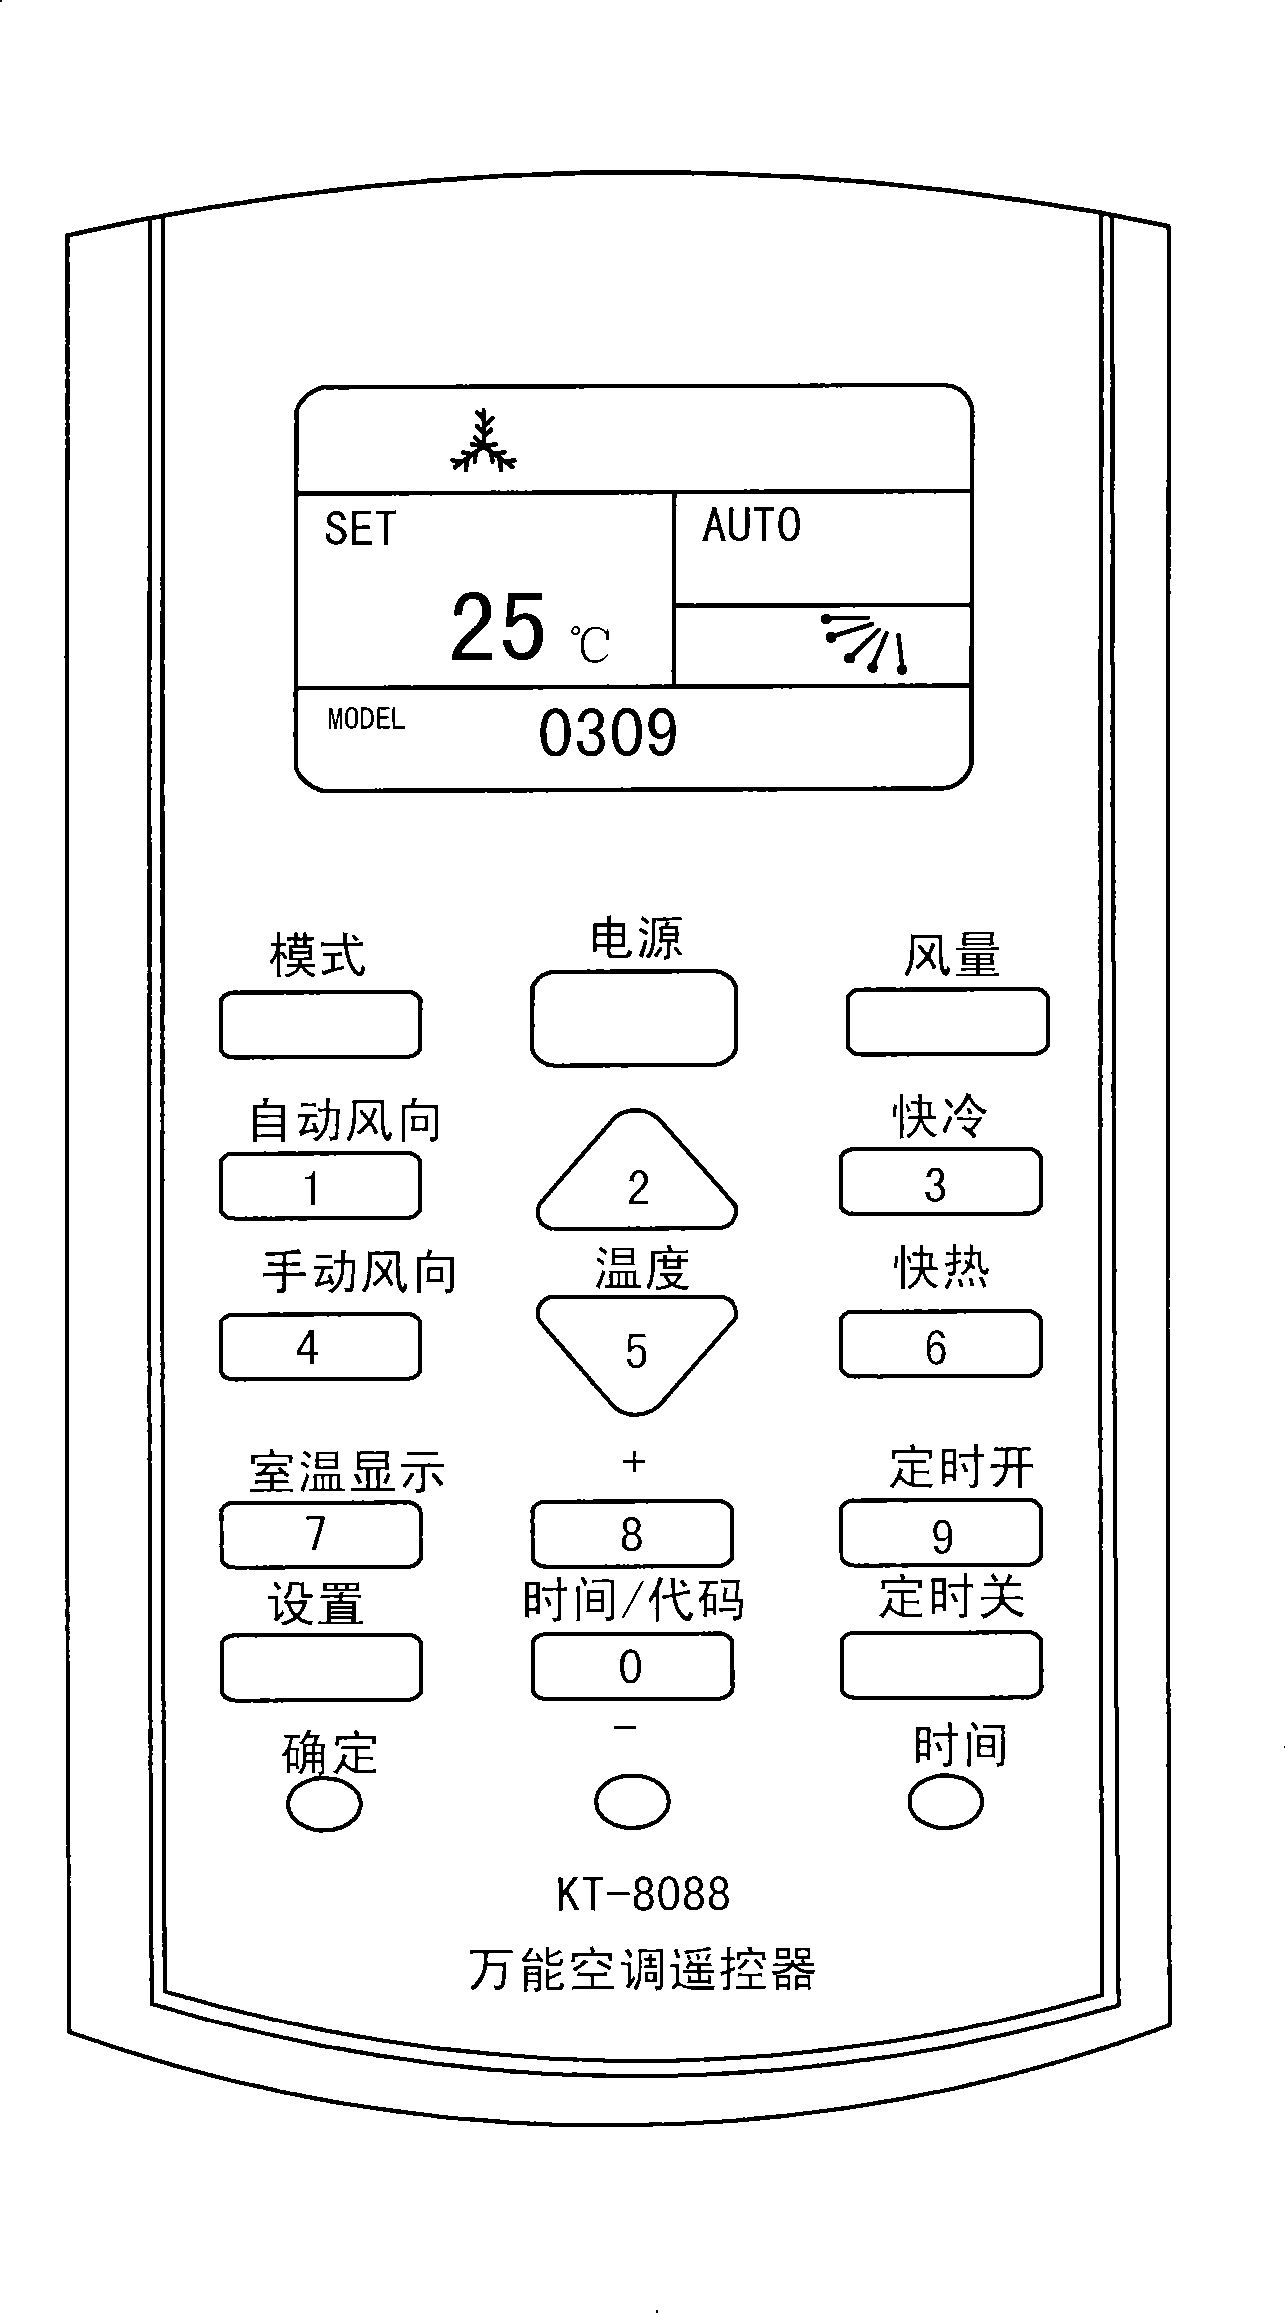 Encode setting method for universal air conditioner telecontroller